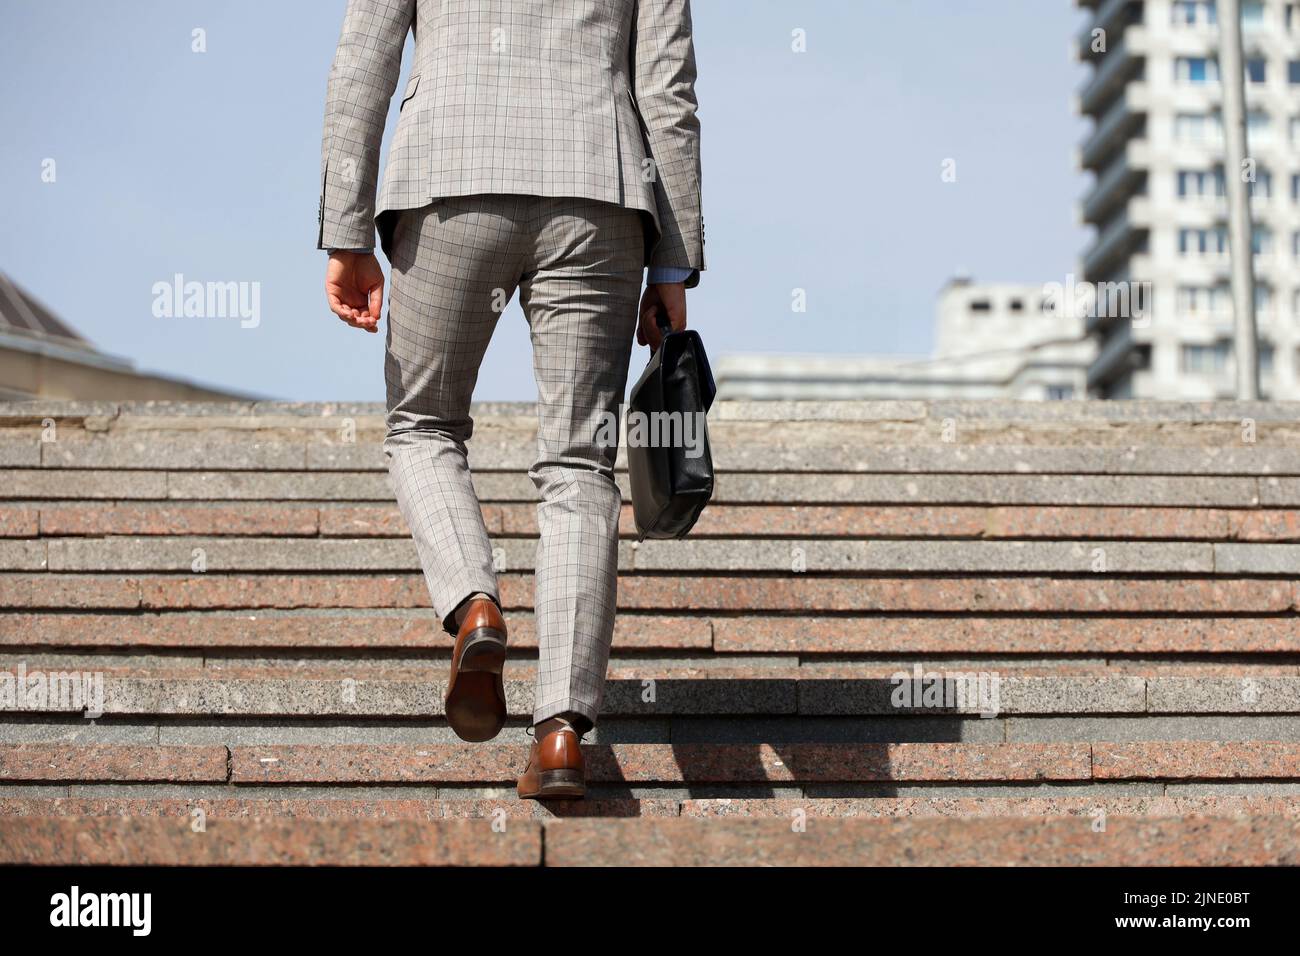 Man in a business suit with leather briefcase climbing stone stairs in city, male legs in motion on the steps. Concept of career, success Stock Photo